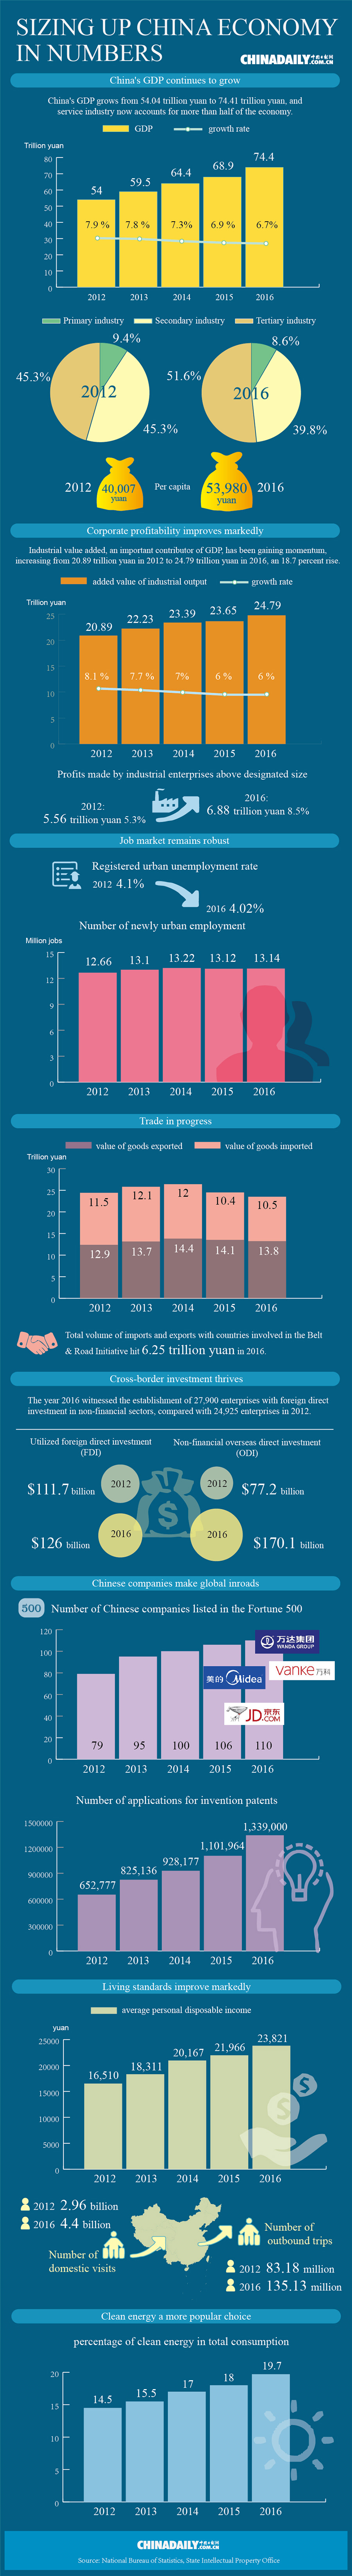 Infographic: Sizing up China economy in numbers